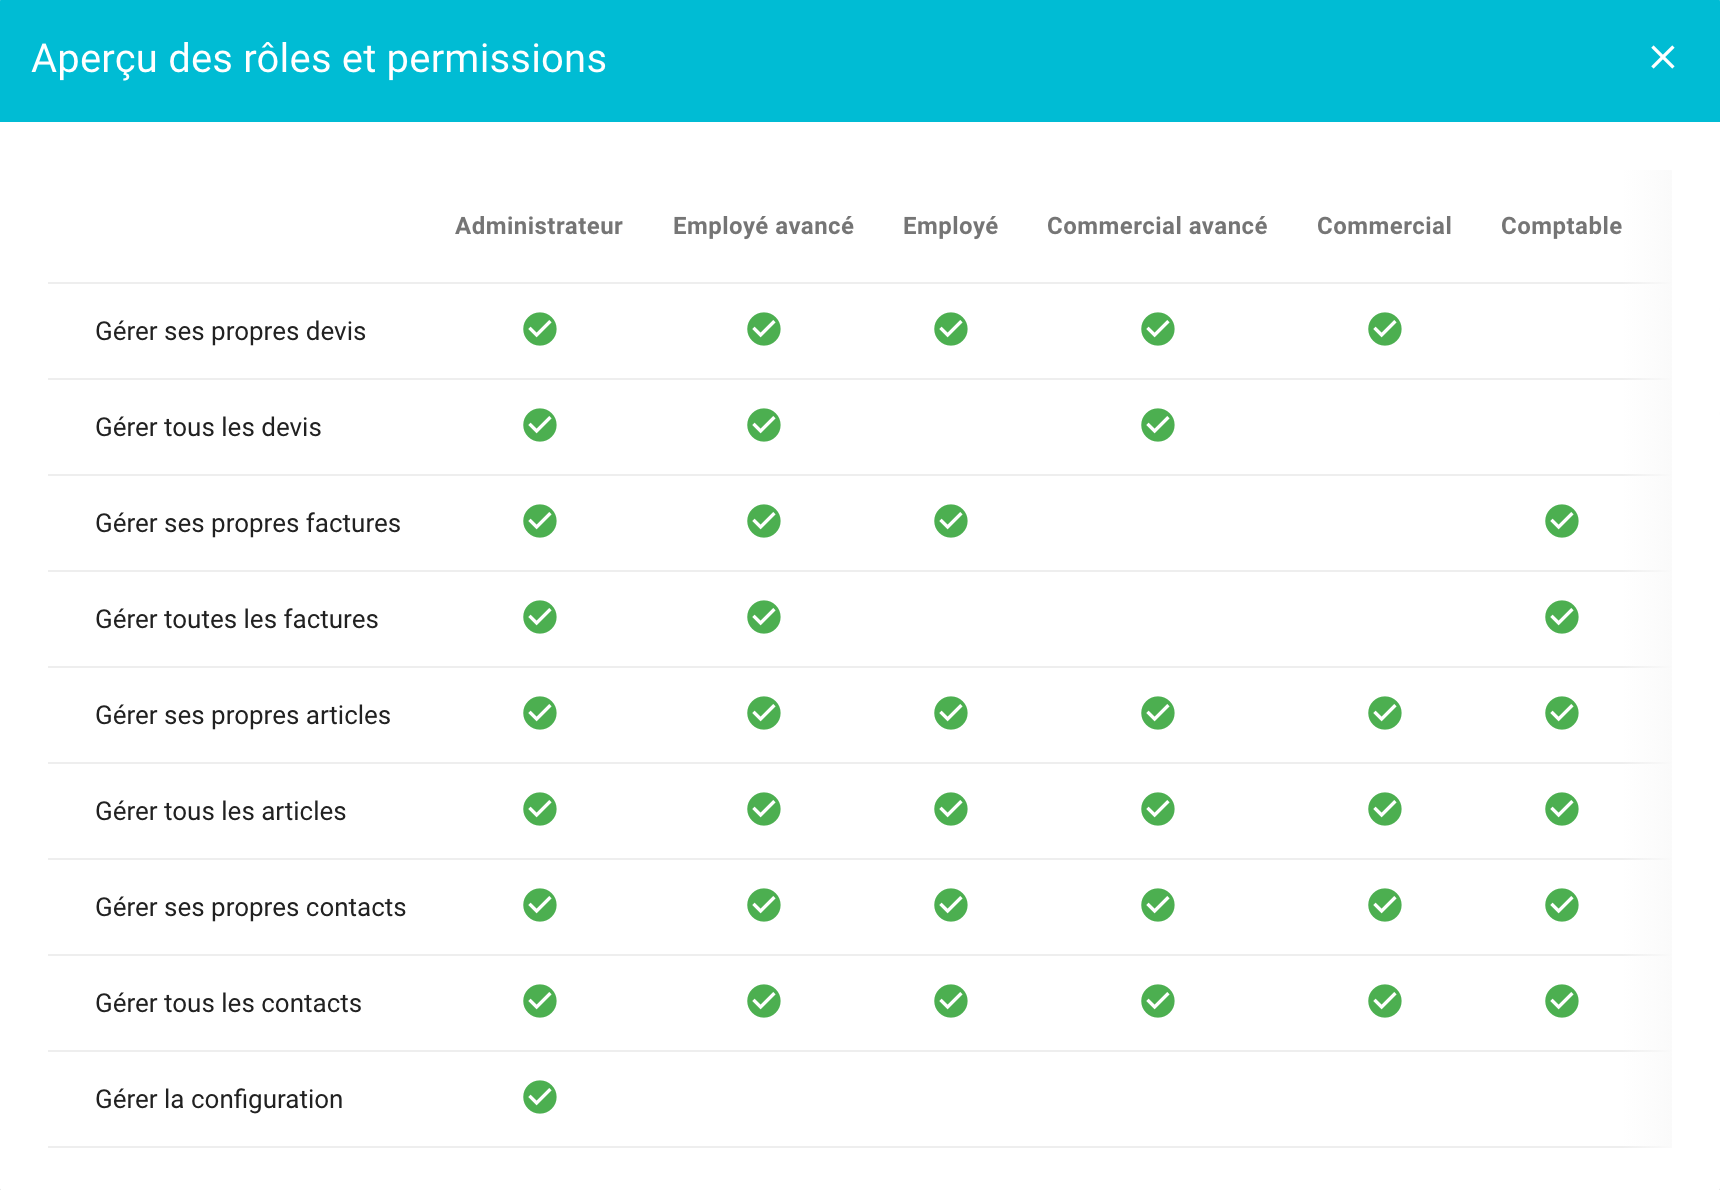 Overview of roles and permissions